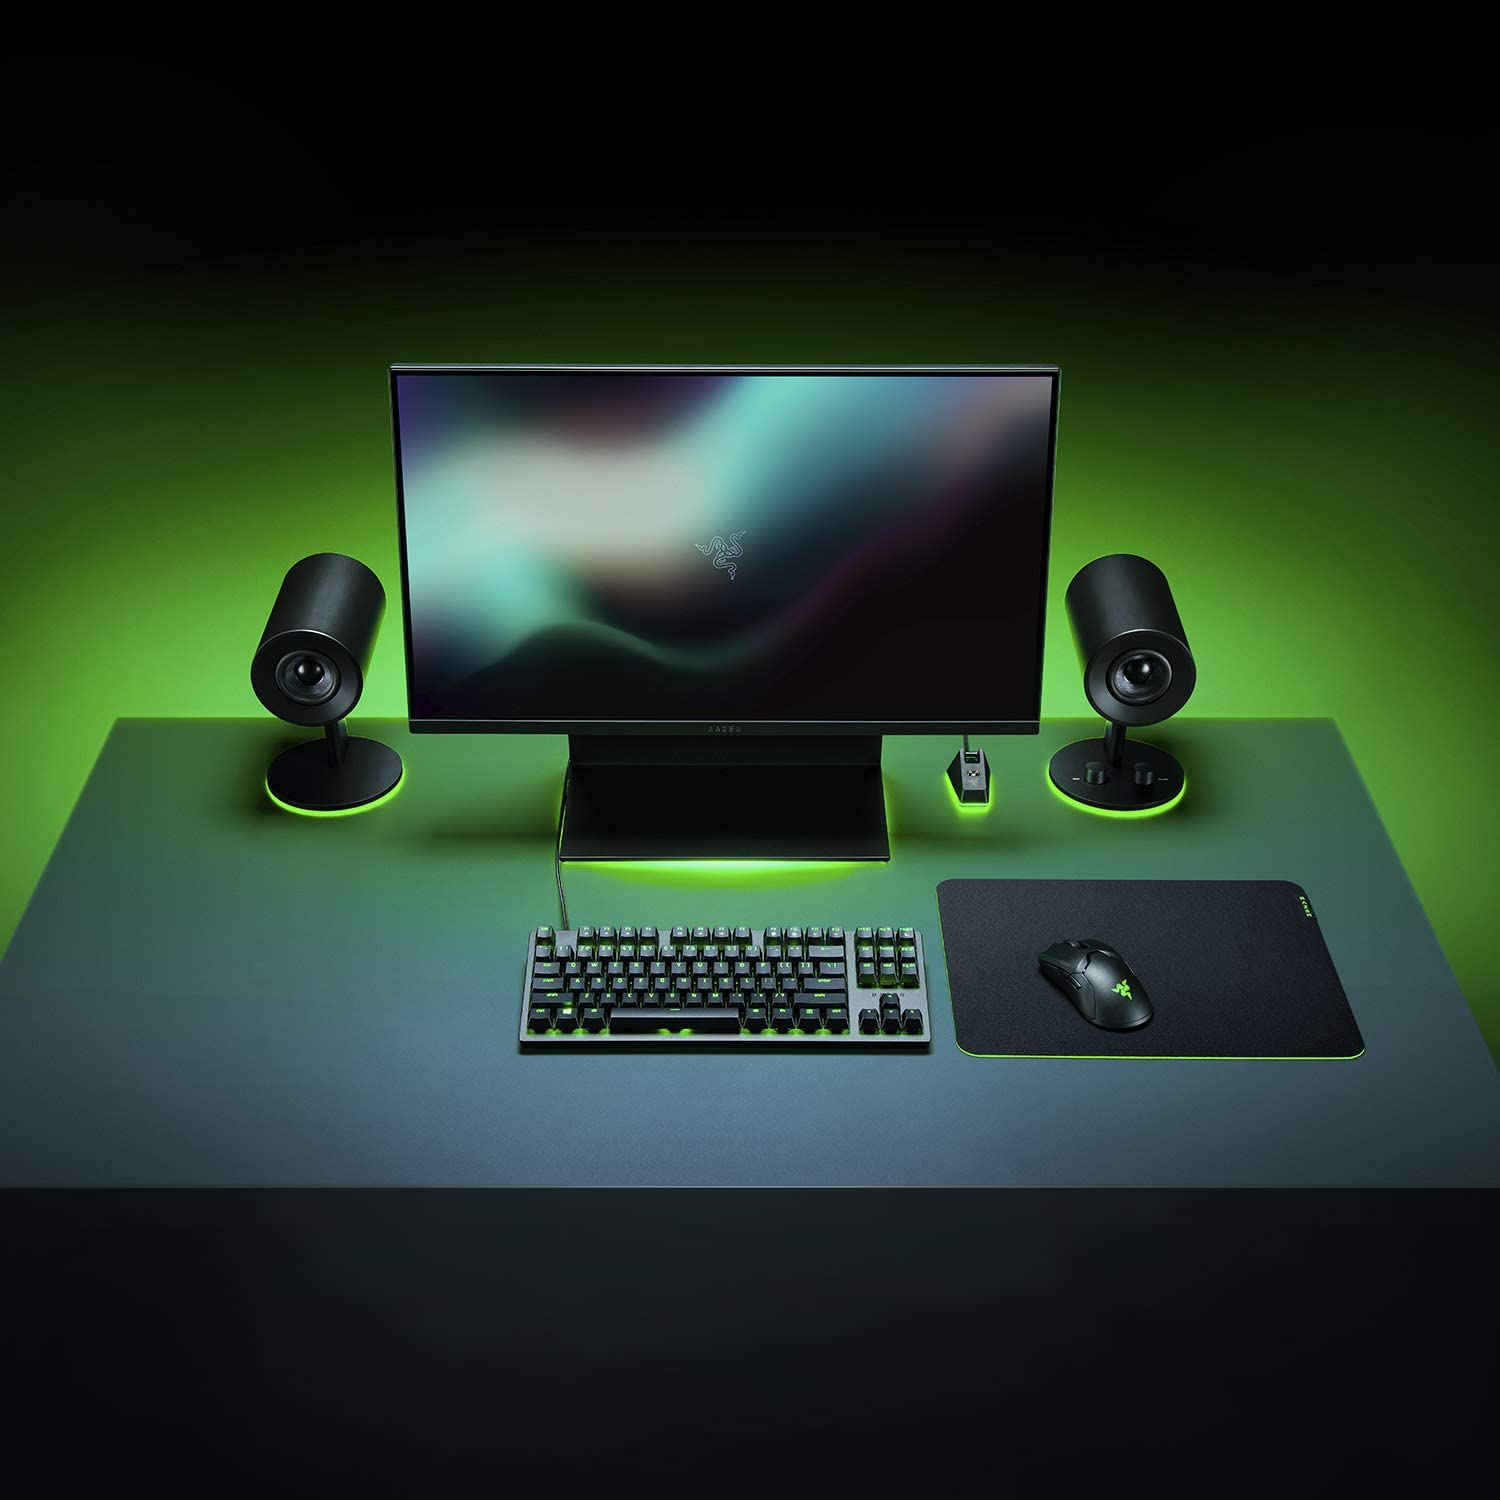 Razer Gigantus V2 Medum - Soft Gaming Mouse Mat for Speed and Control, 360 x 275 x 3 mm, Non-Slip Rubber, Textured Micro-Weave Cloth - RZ02-03330200-R3M1